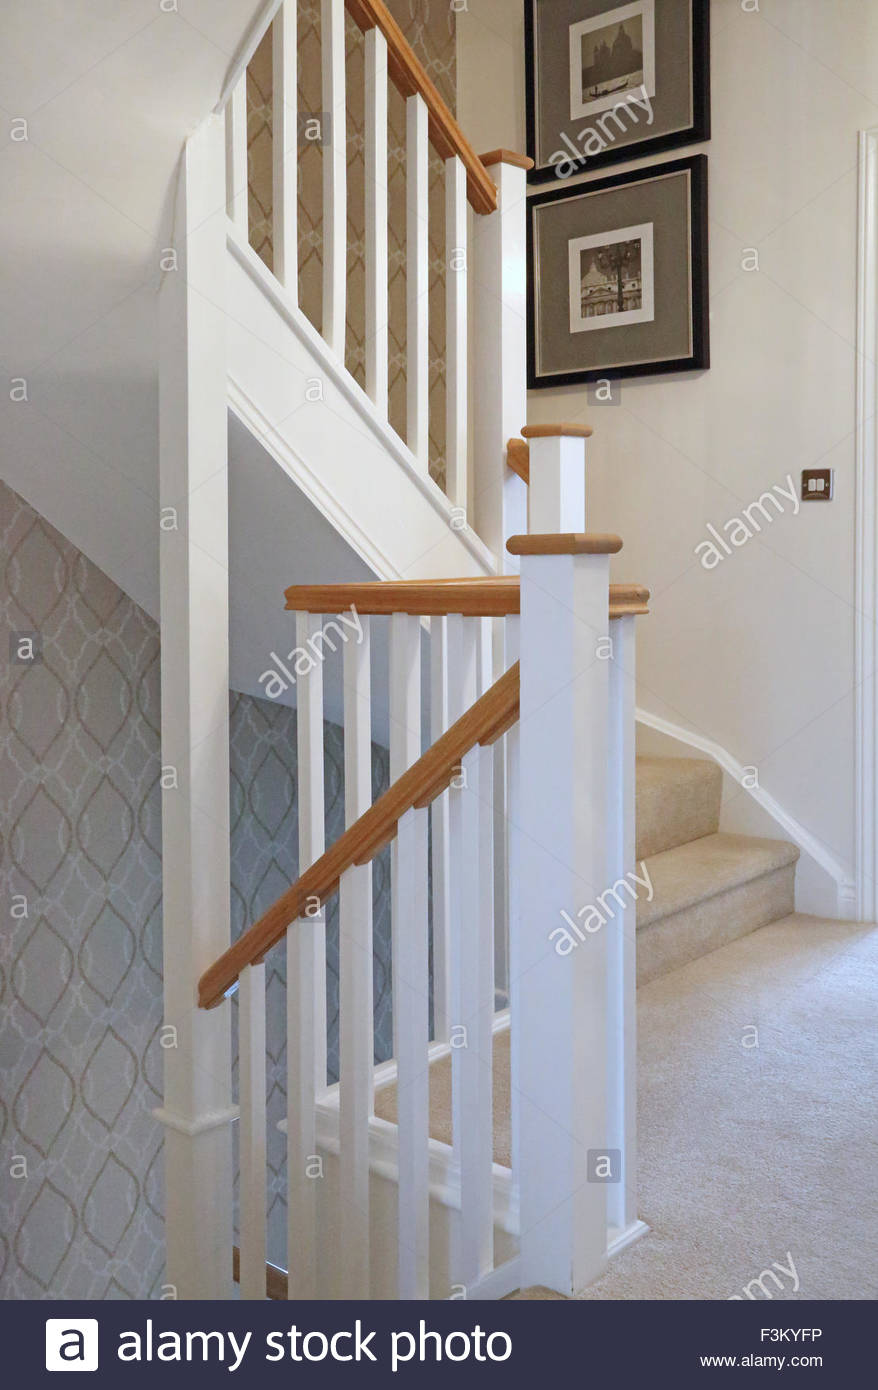 banisters